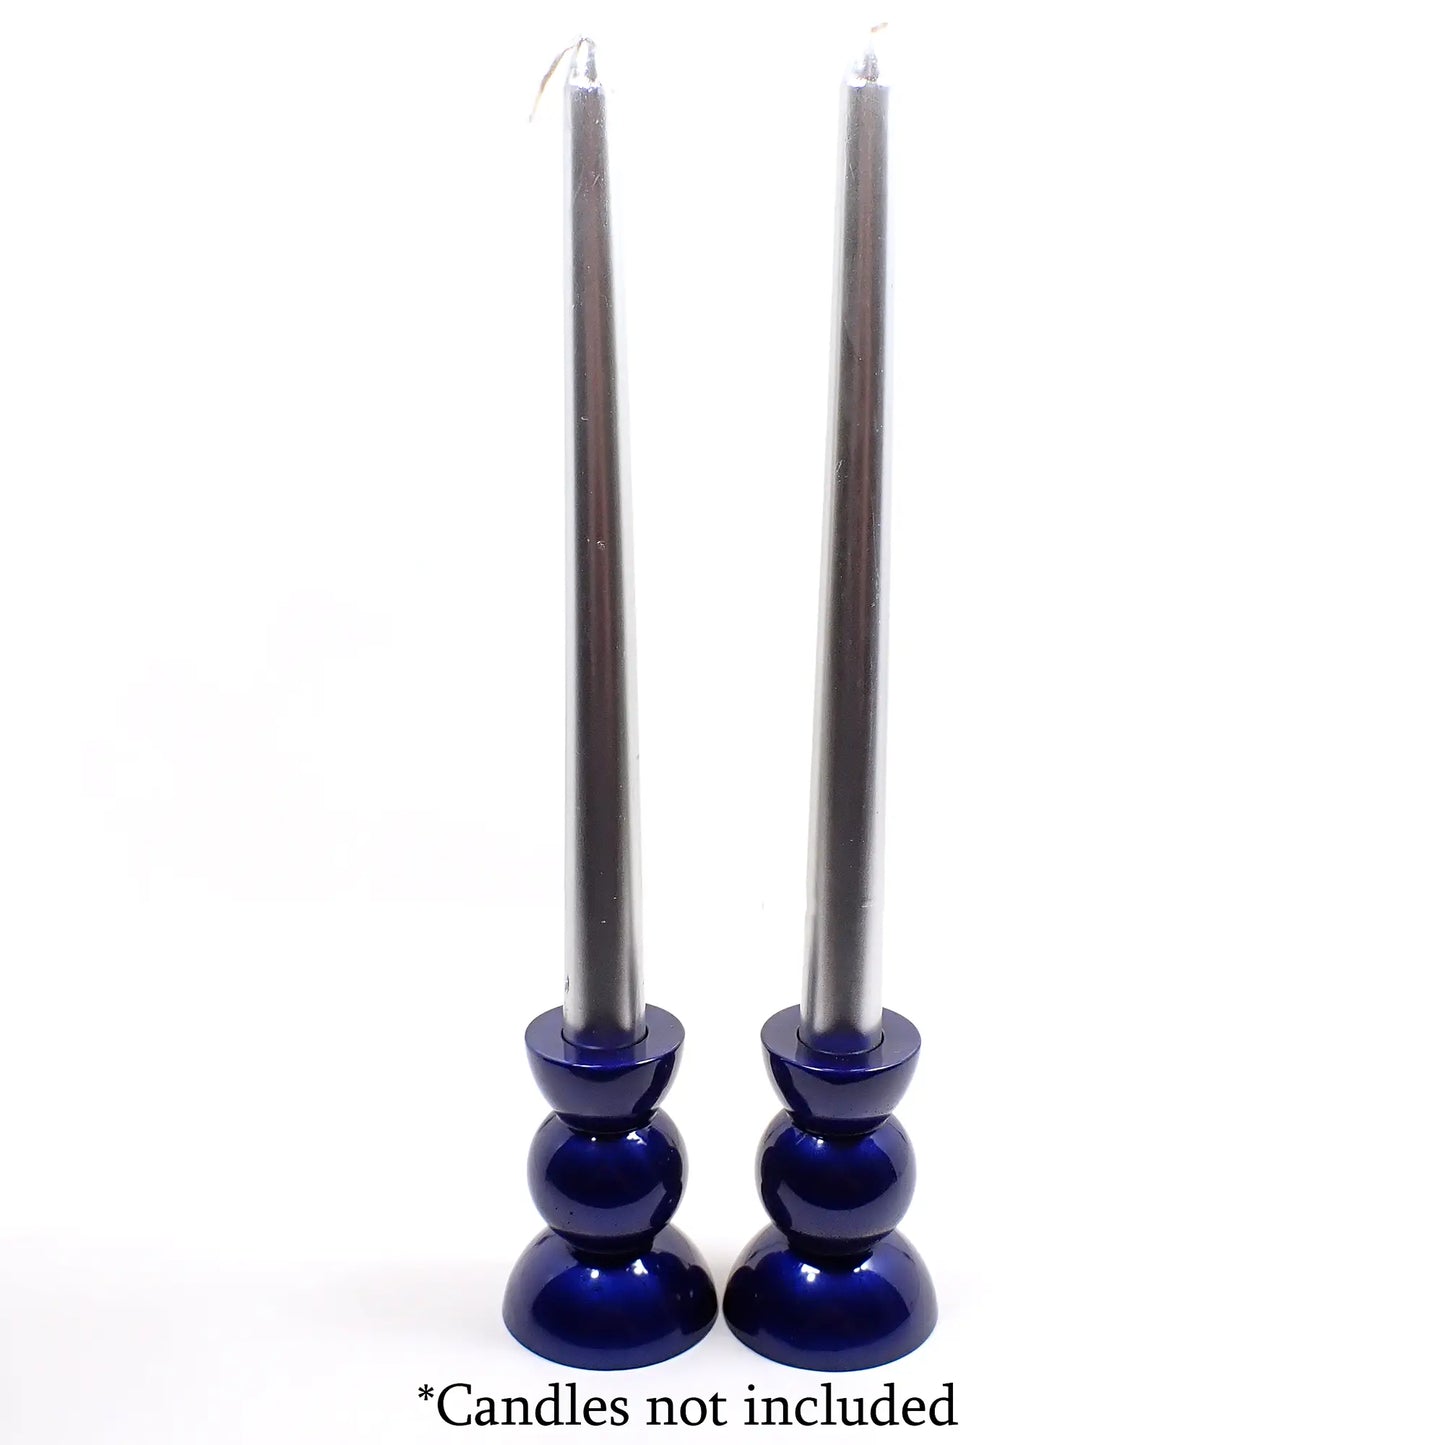 Set of Two Handmade Pearly Cobalt Blue Resin Rounded Geometric Candlestick Holders